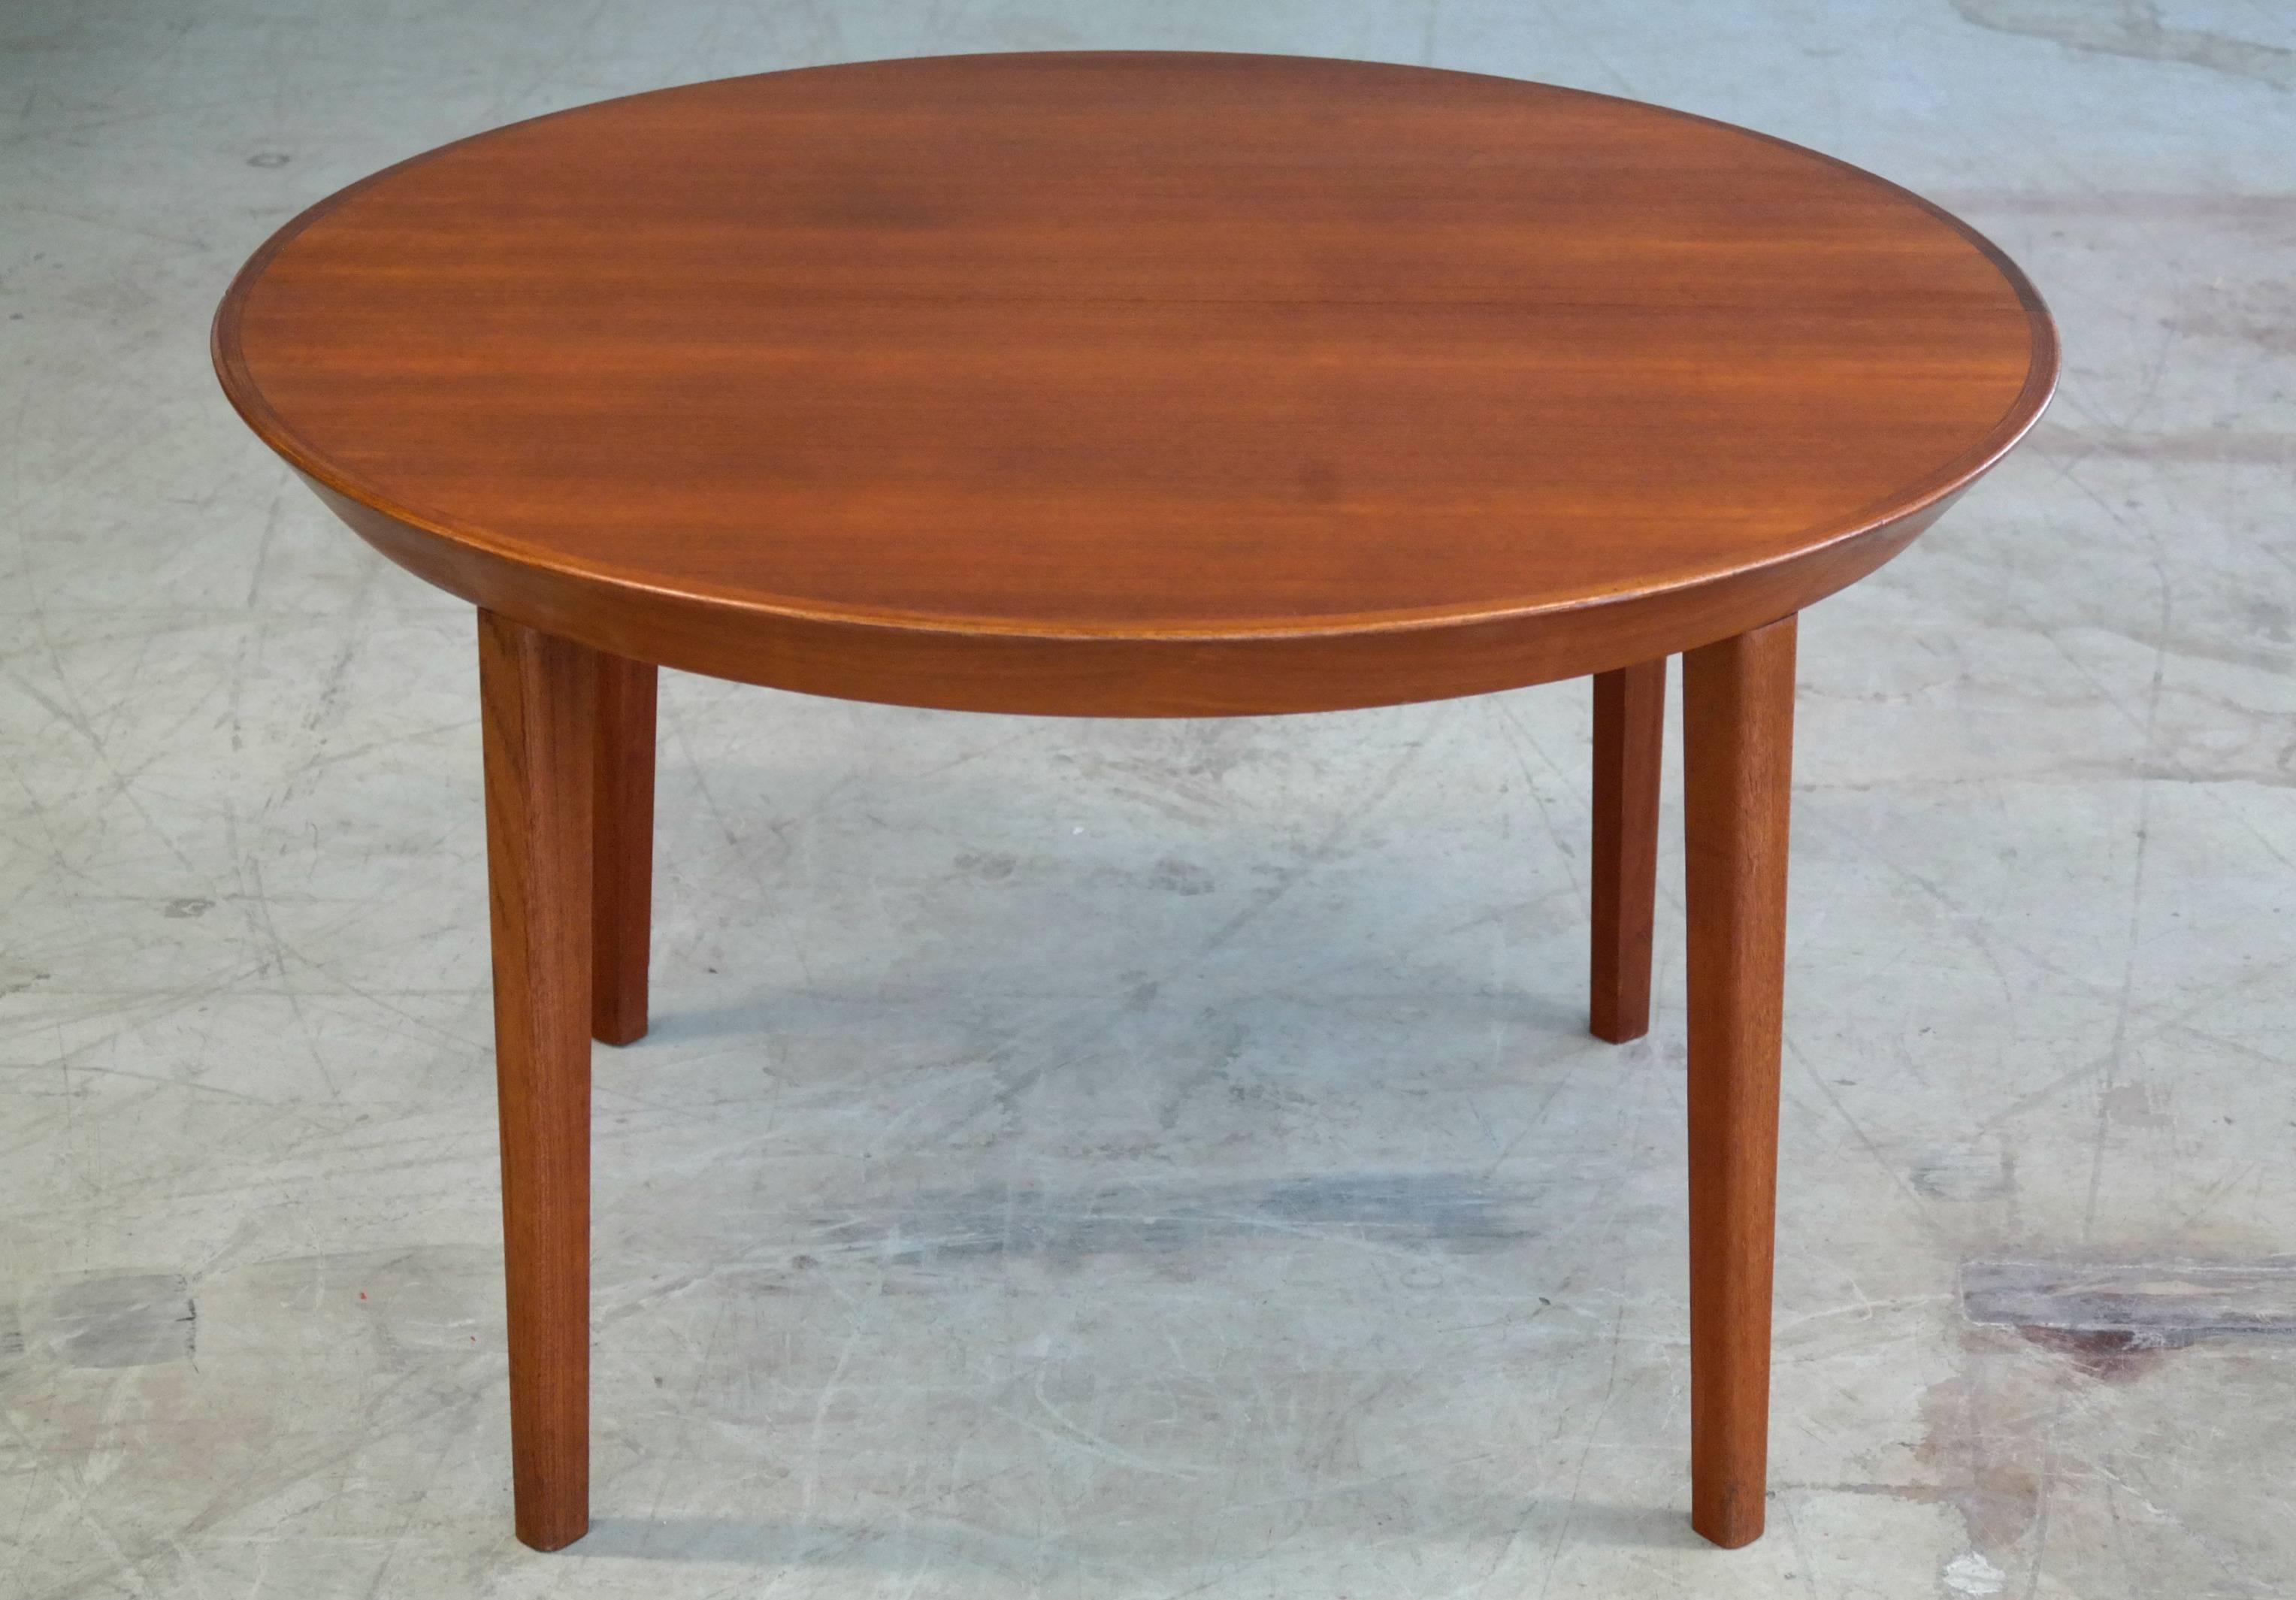 Beautiful all original round dining table with beveled edges greatly designed by Ole Hald for Gudme Møbelfabrik in the mid-late 1960s. Superb quality and excellent condition with beautiful deep color and grain. The table has a 19 inch extension leaf